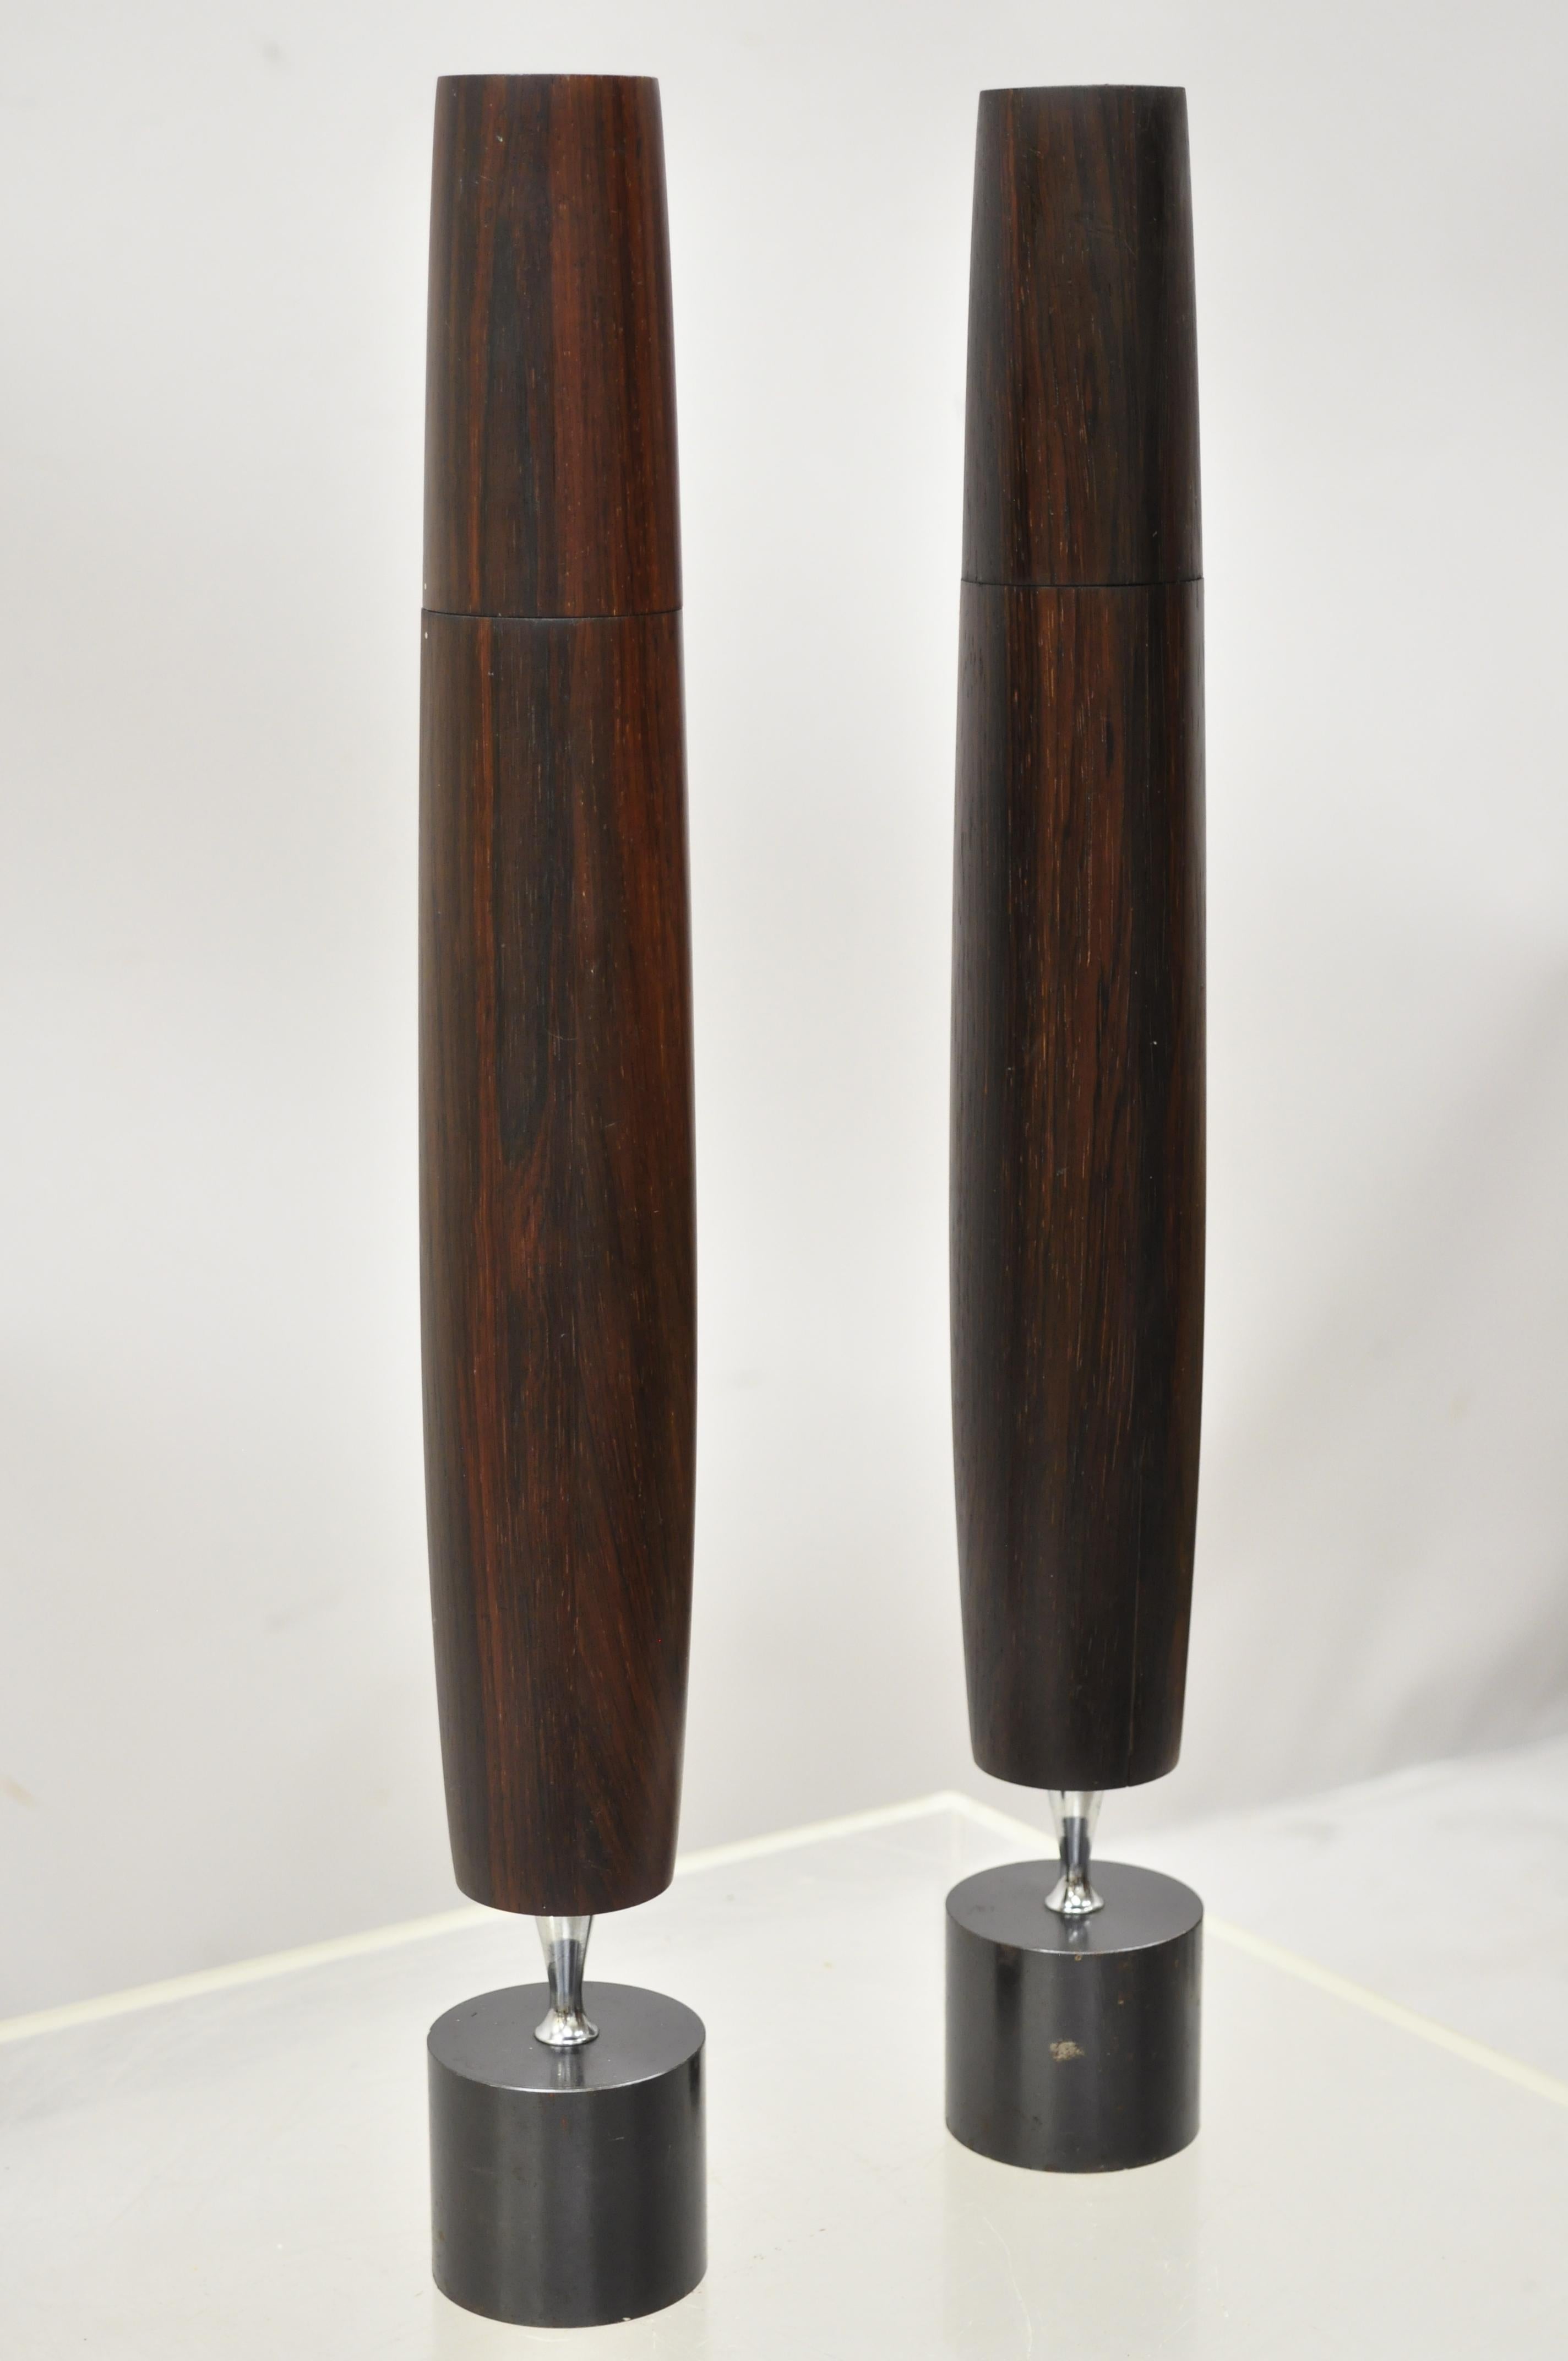 Mid Century Danish Modern 1964 Ronson Varaflame Rosewood Candlesticks - a Pair. Item features a heavy weighted iron base, butane lighter fluid, tall impressive form, solid wood construction, beautiful wood grain, original label, very nice vintage